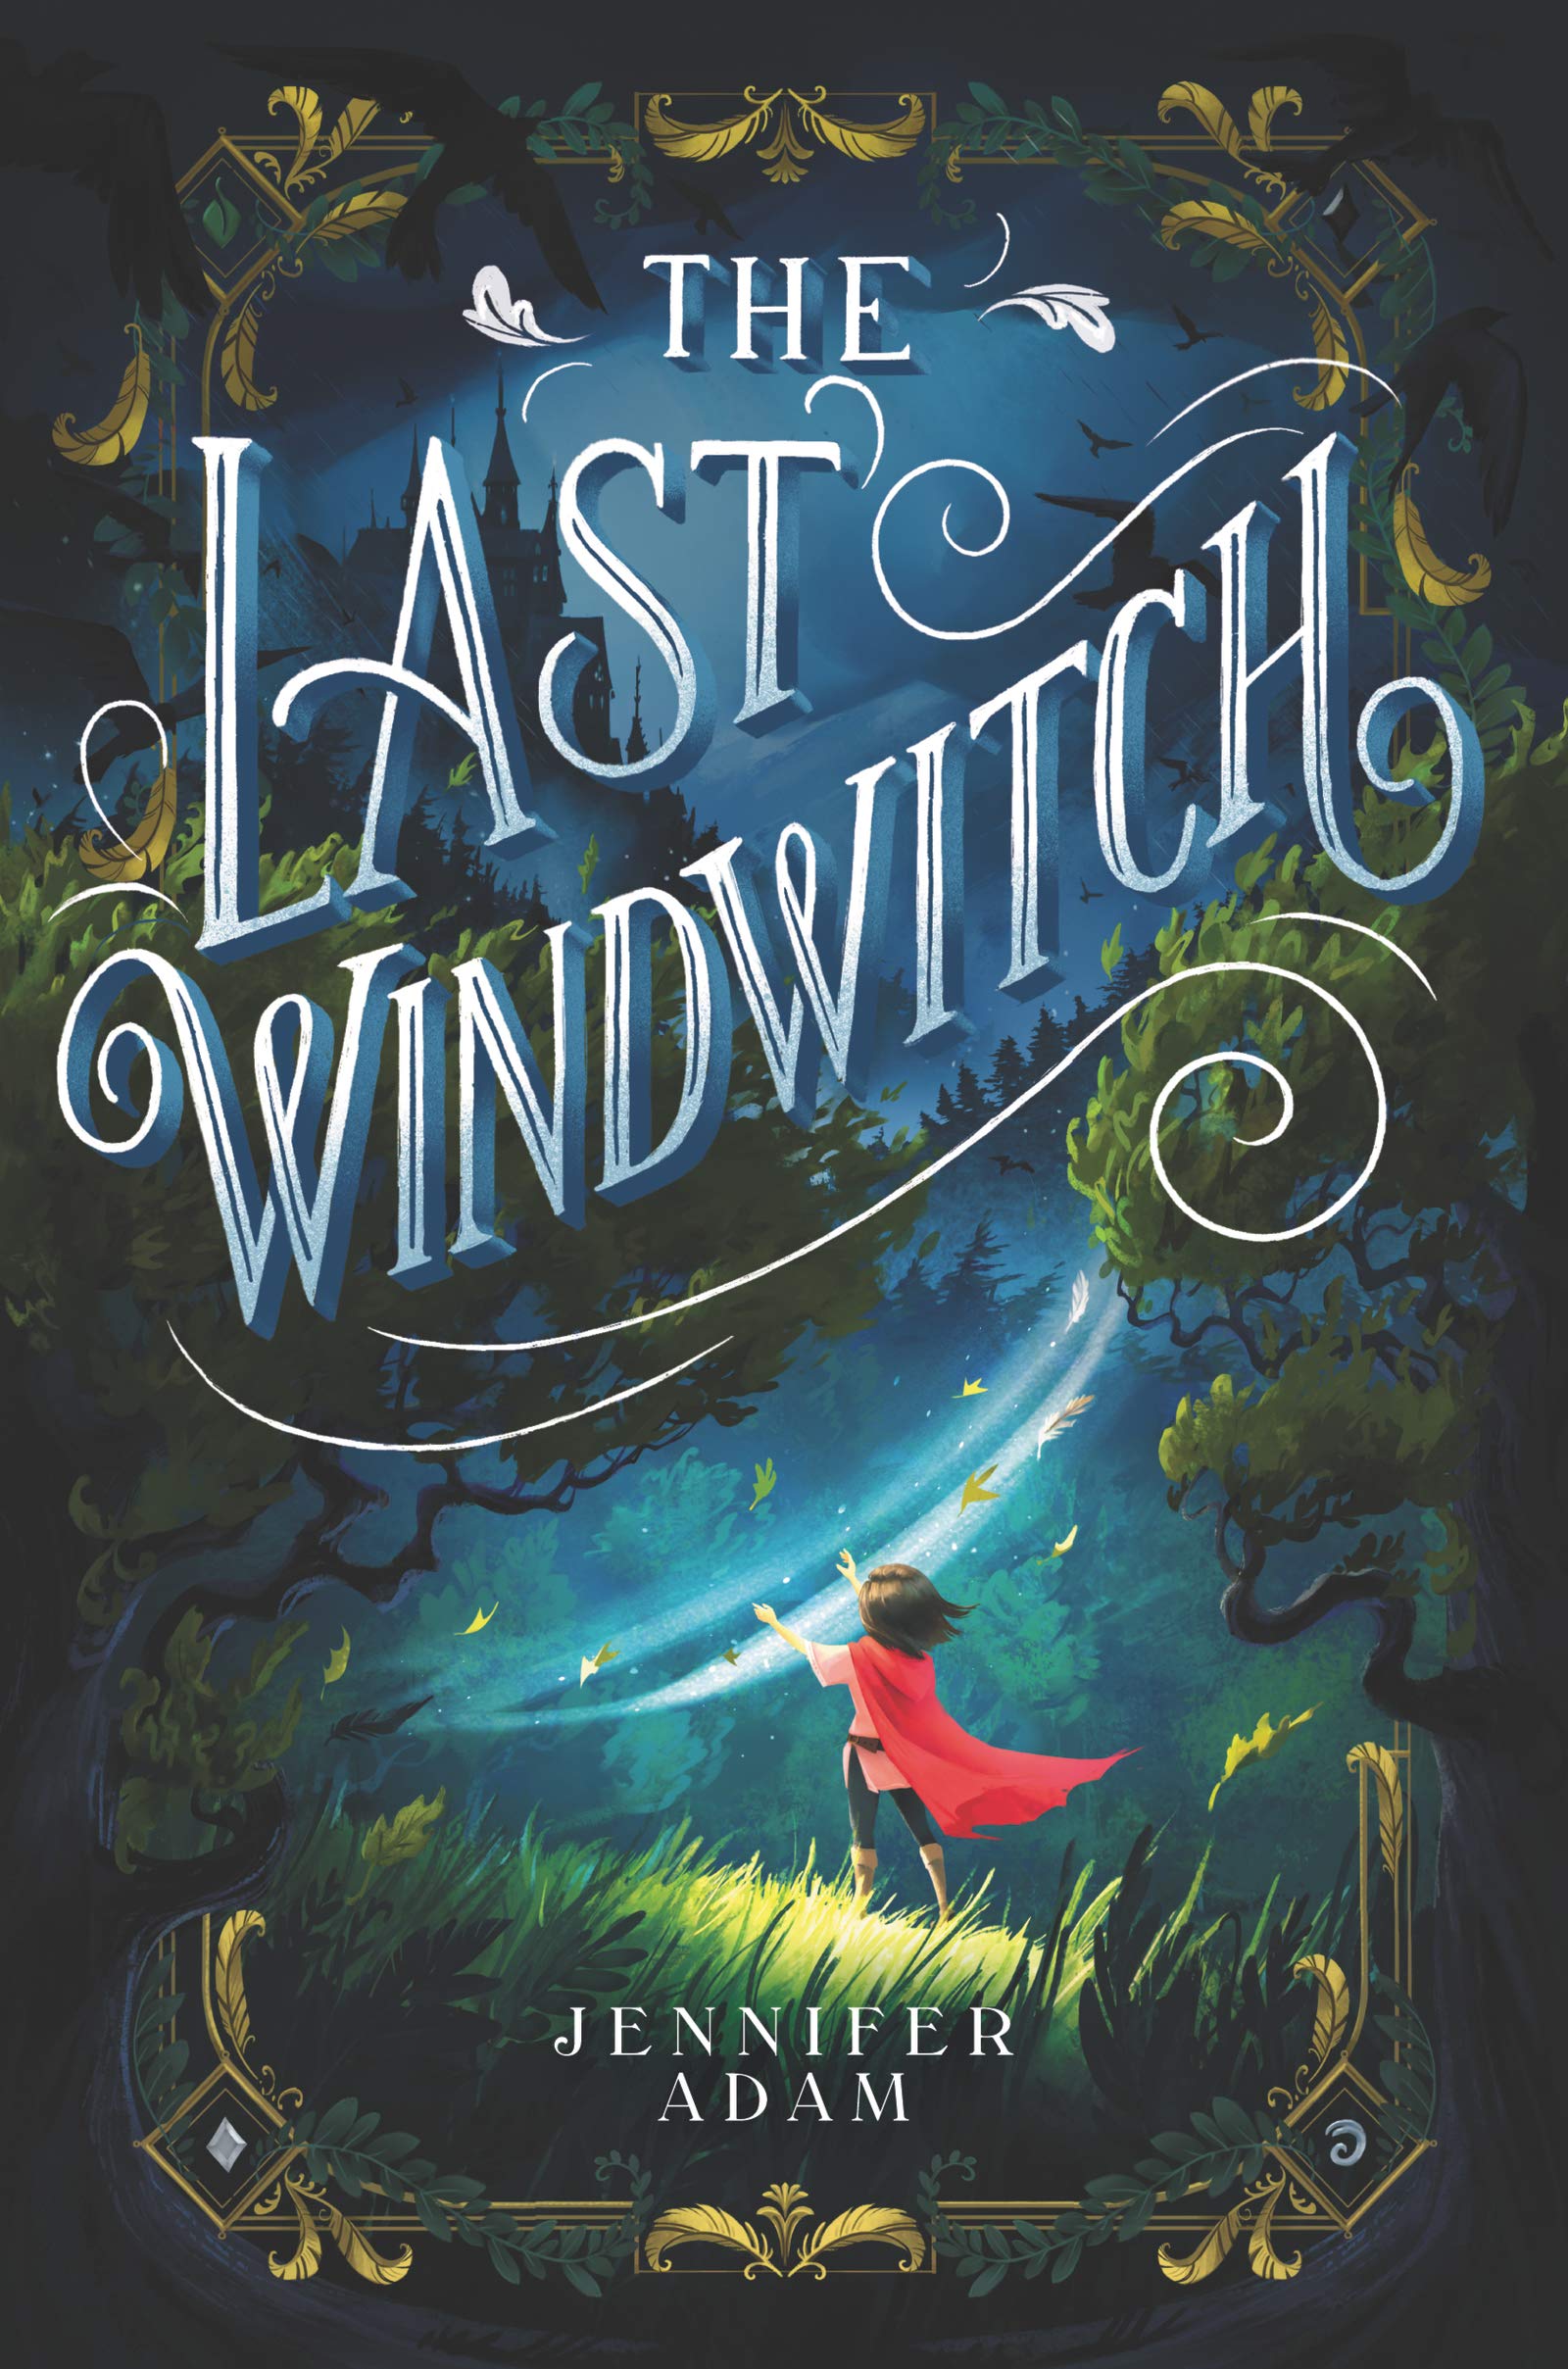 Image for "The Last Windwitch"